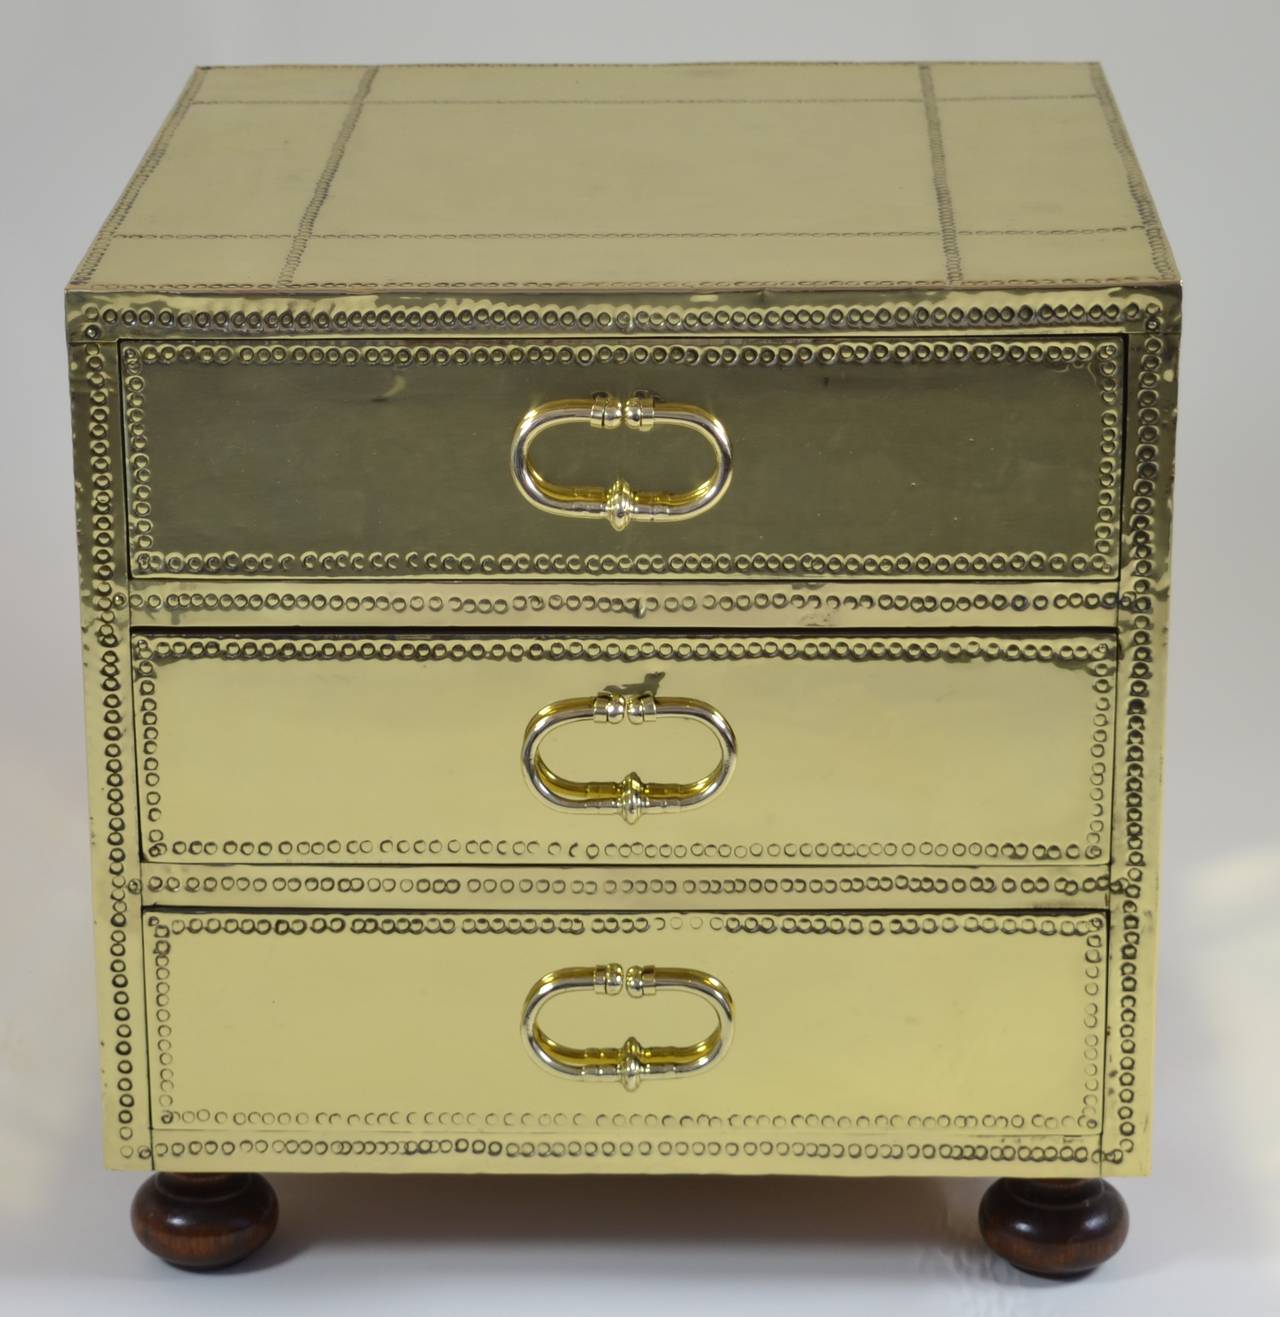 Sarreid three-drawer small brass-clad chest. Featuring three wood drawers and bun feet. Great quality and a very useful size. Professionally polished and lacquered.